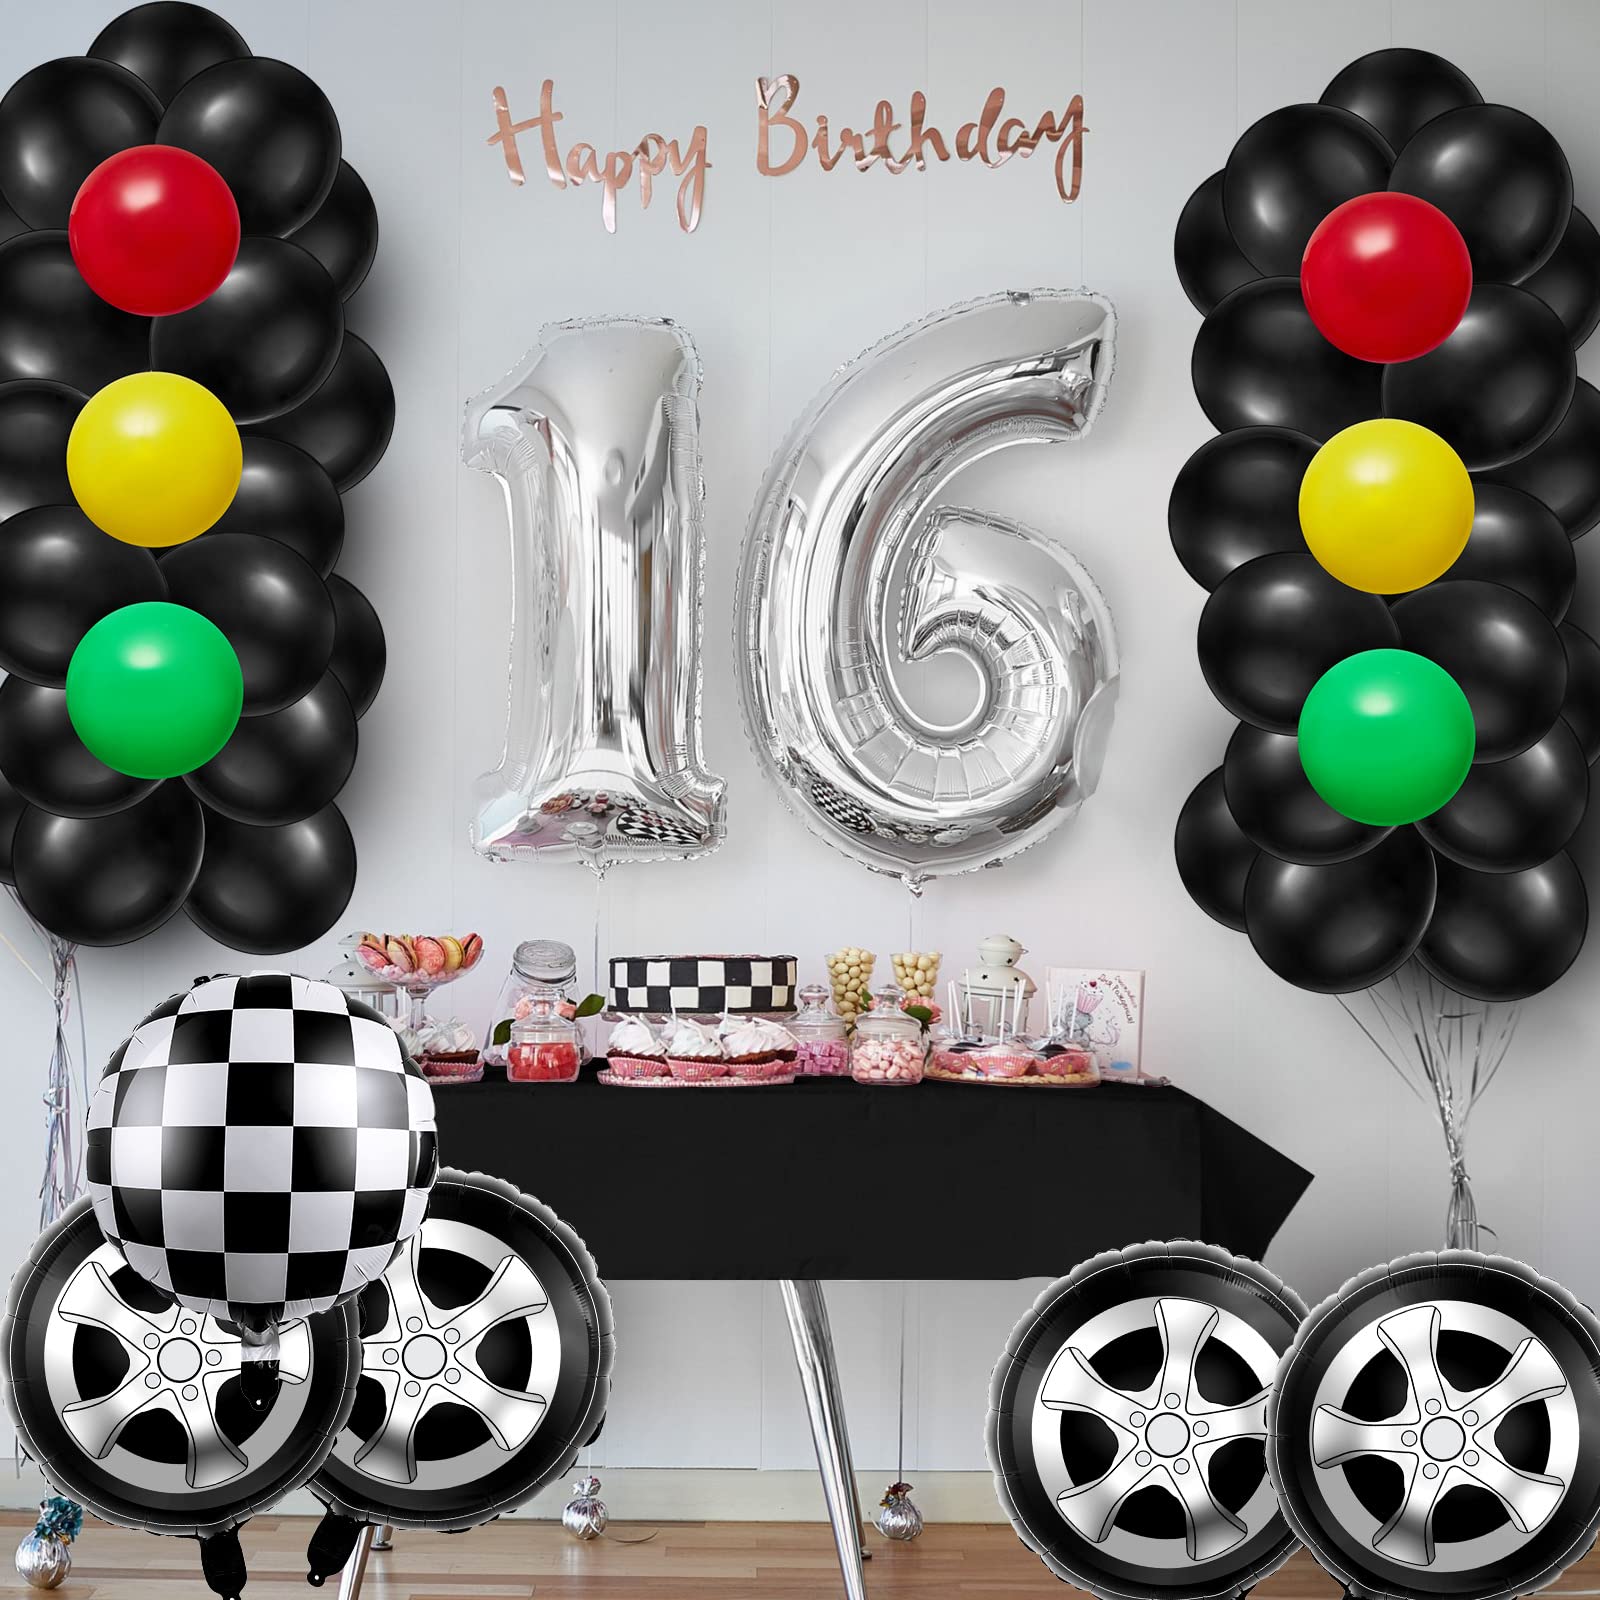 66 Pcs Car Party Decorations Inflatable Tires Traffic Light Balloons Party Supplies Include Foil Checkered Balloons, Tire Balloons, Glue, Chain, Birthday Party Decorations Fit for Boys Race Fans